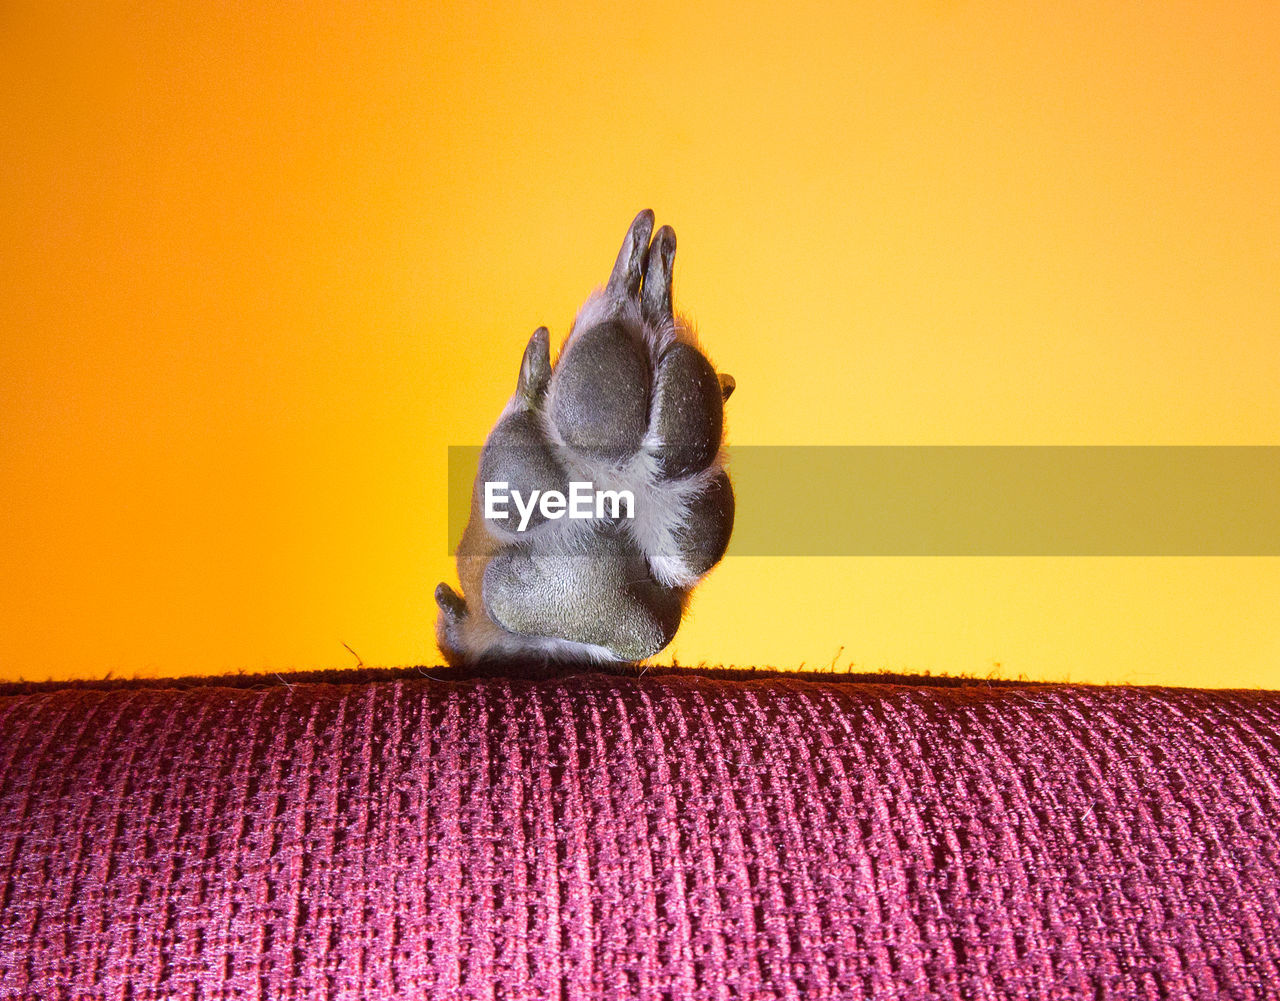 Dog's paw over the edge of a red sofa, shot from below with a yellow lit ceiling behind